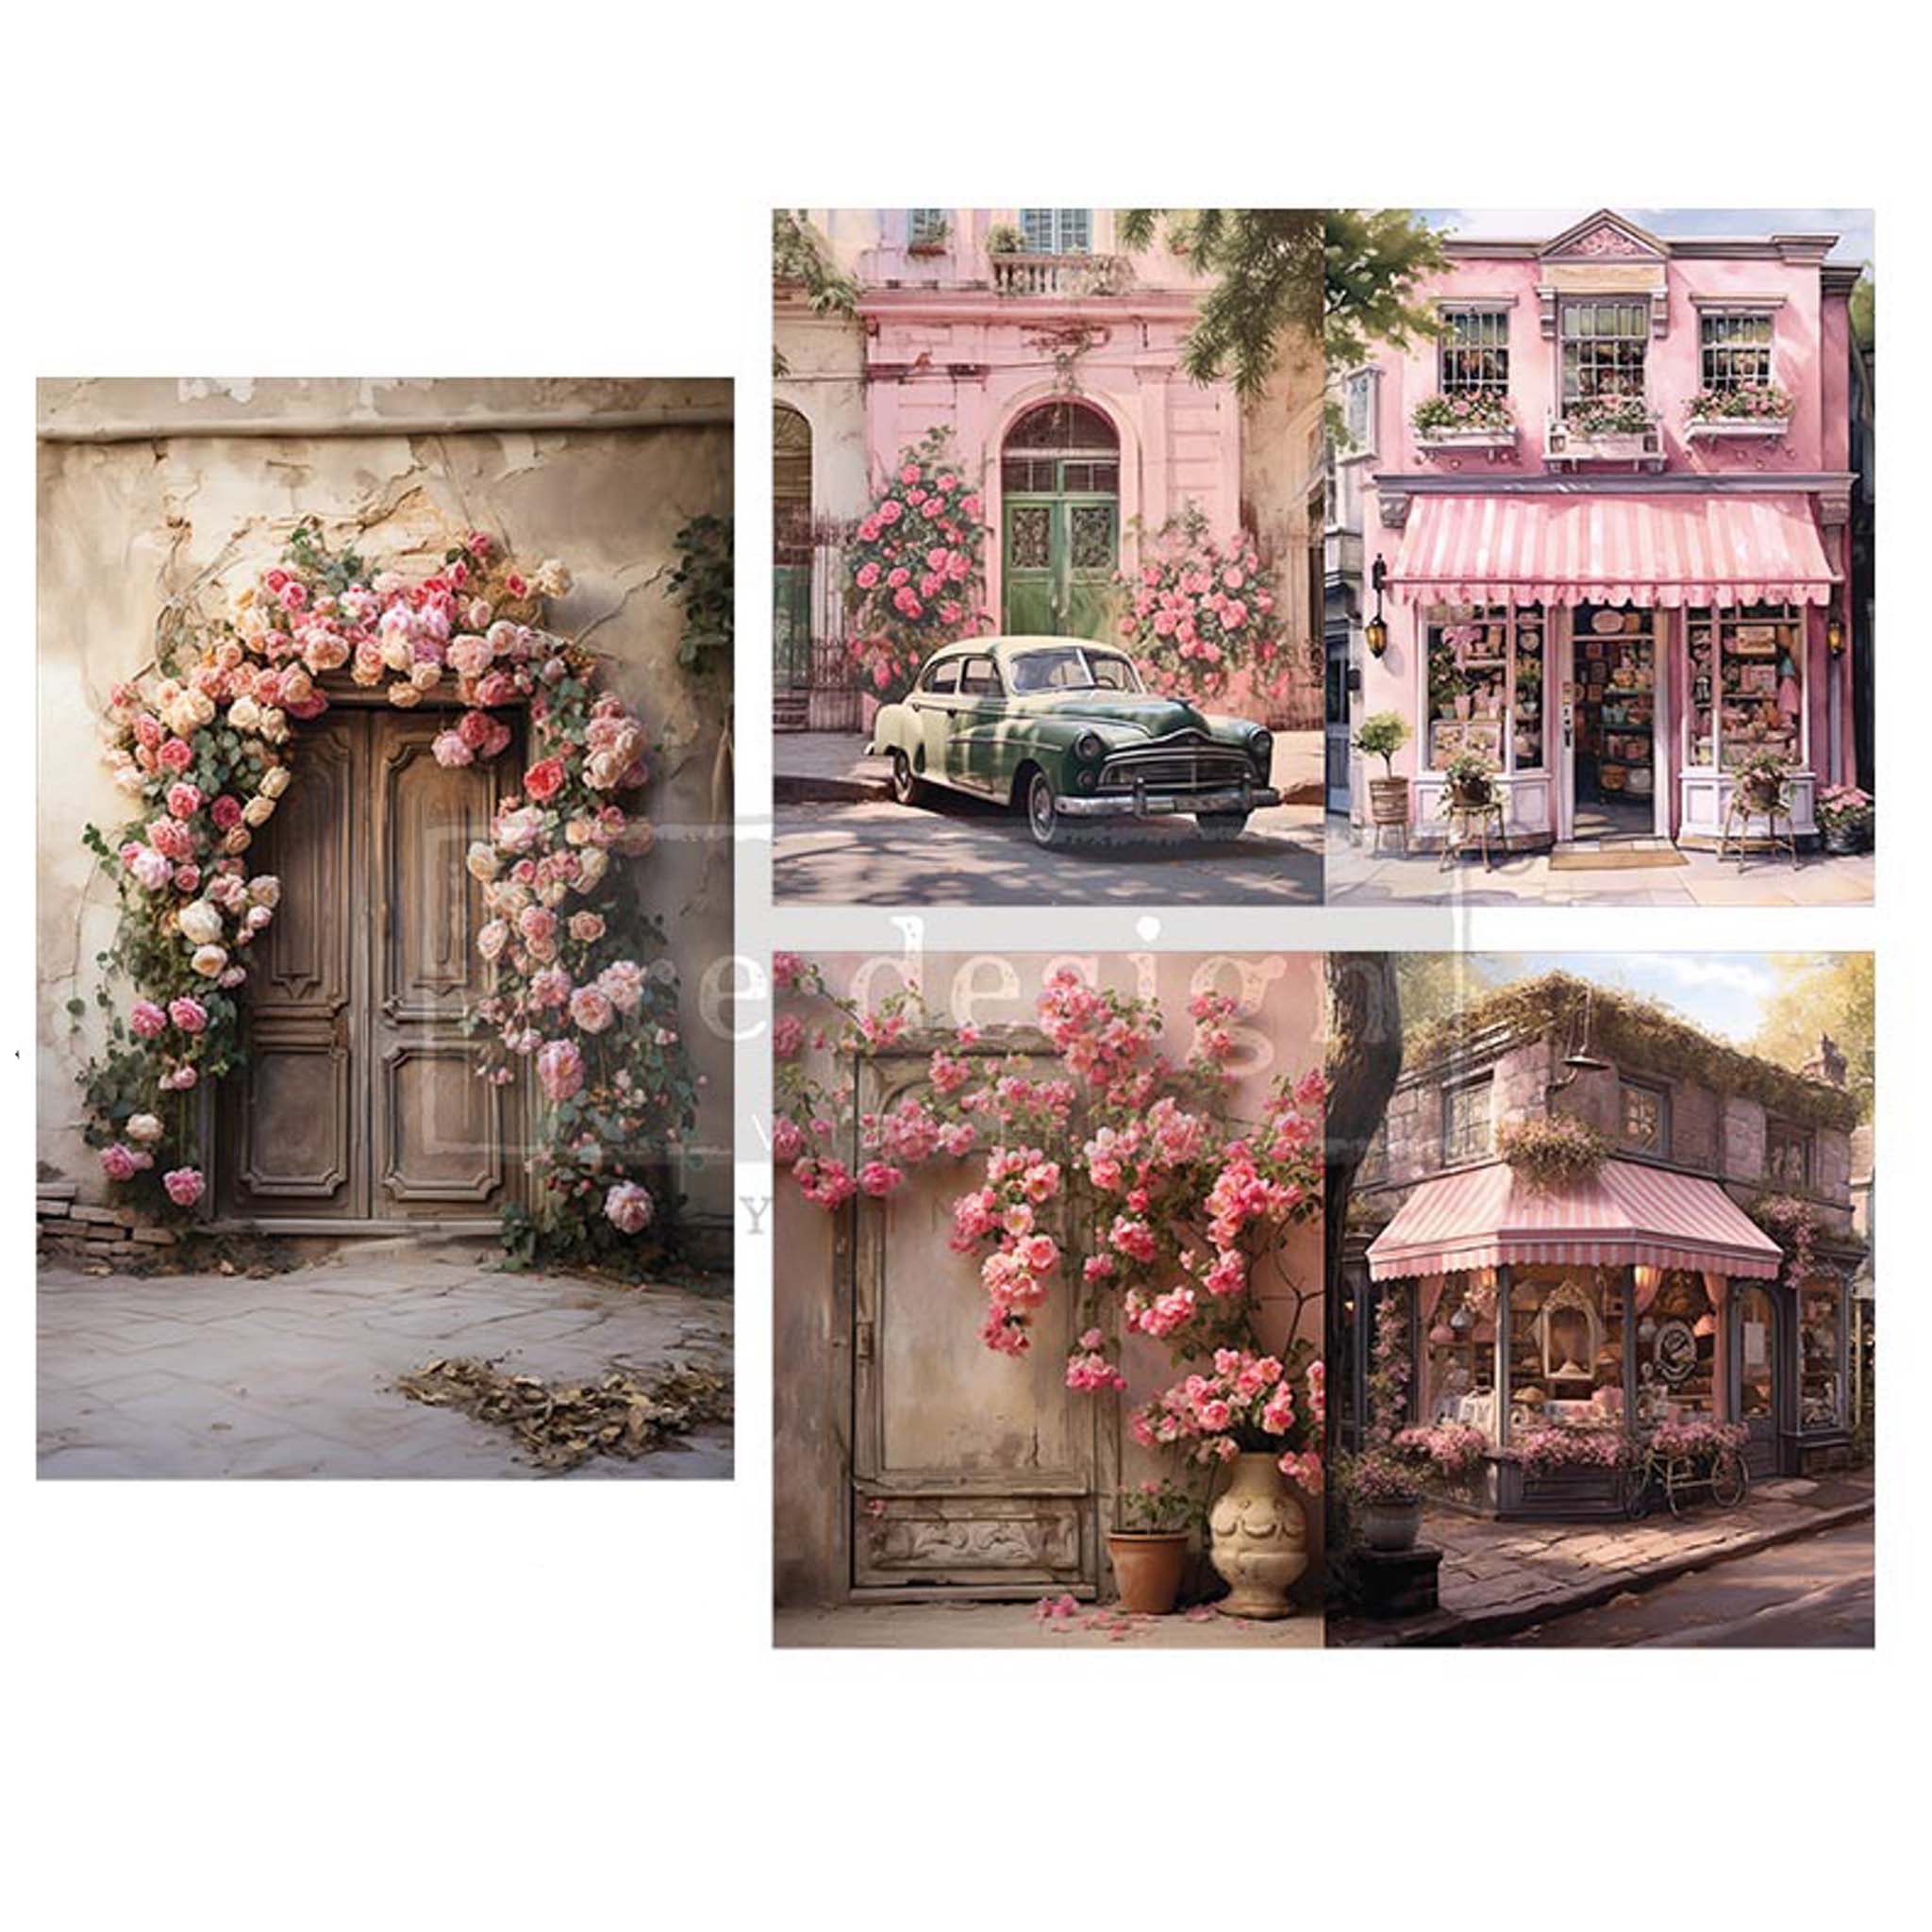 3 sheets of ReDesign with Prima's Blush Blossom Boulevard tissue paper featuring colorful flower designs, quaint homes, and vintage storefronts against a white background.